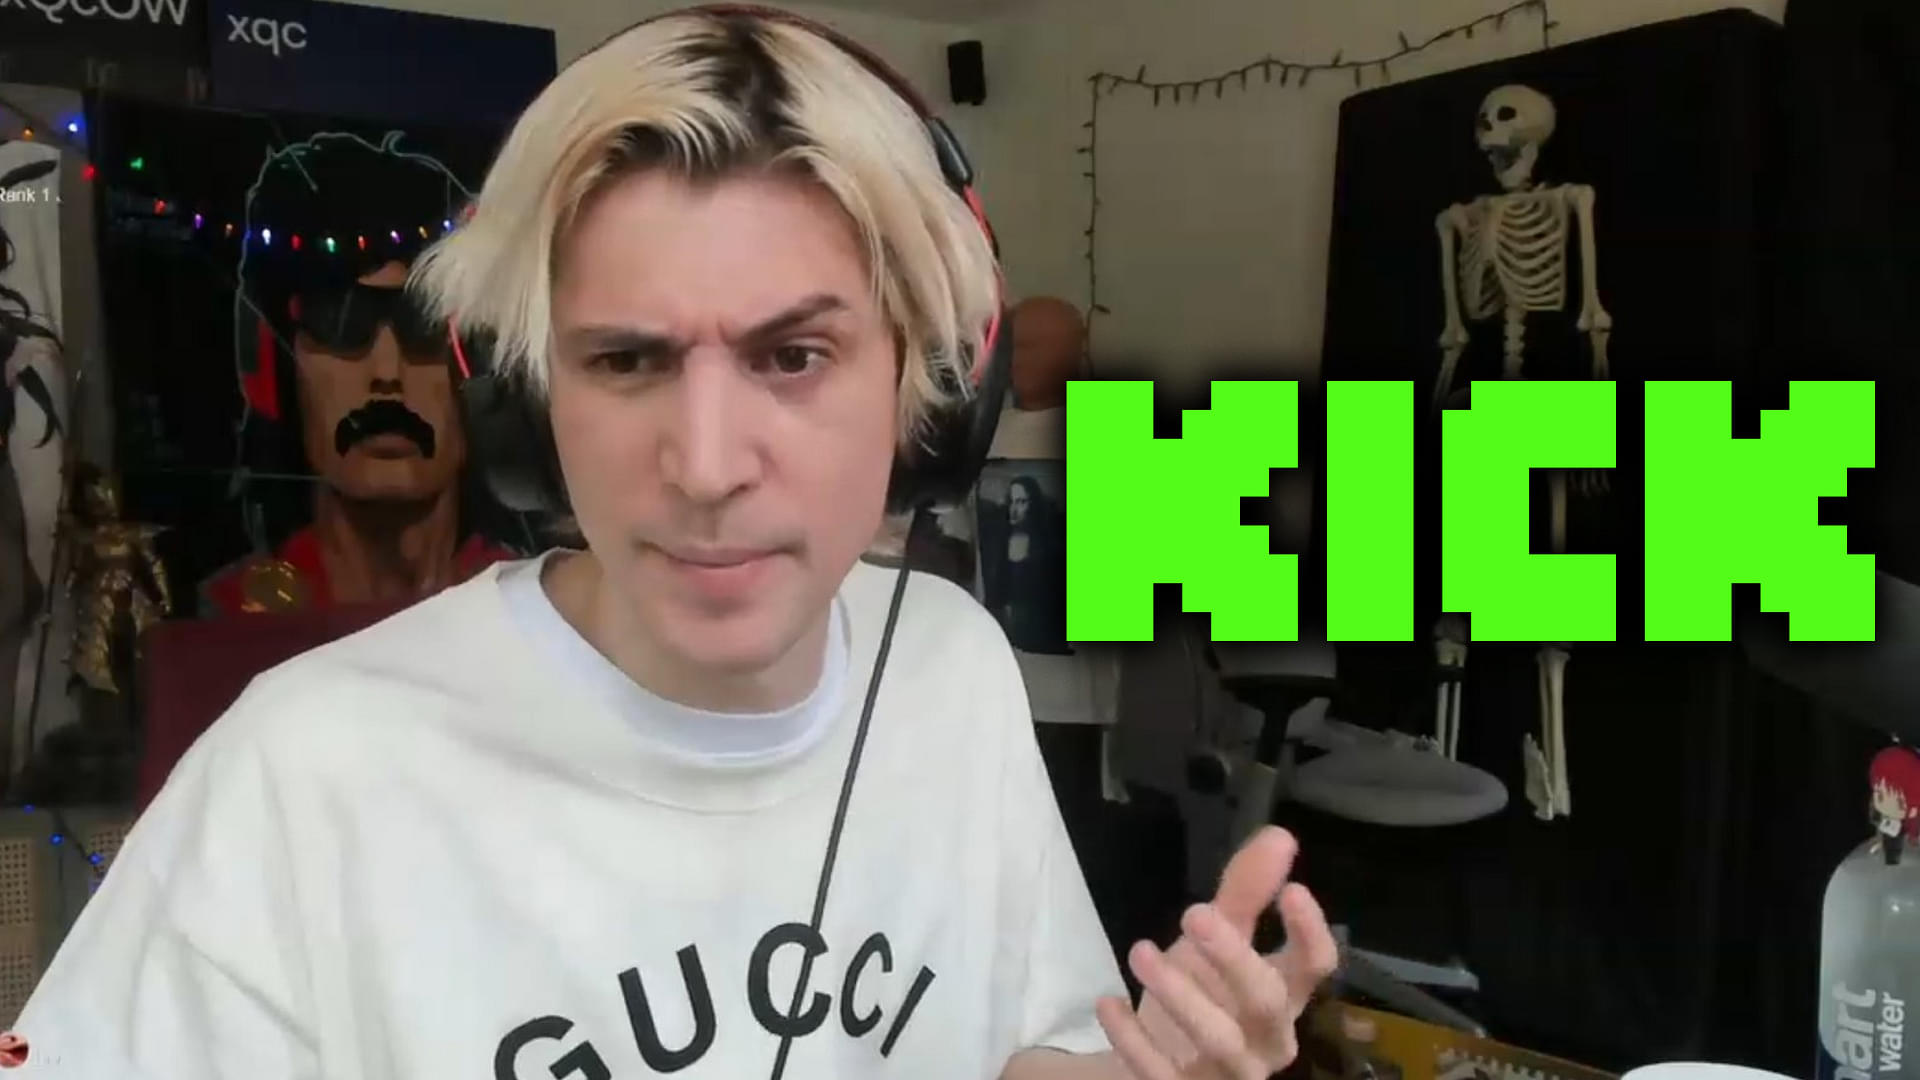 An image showing the face of xQc with Kick logo